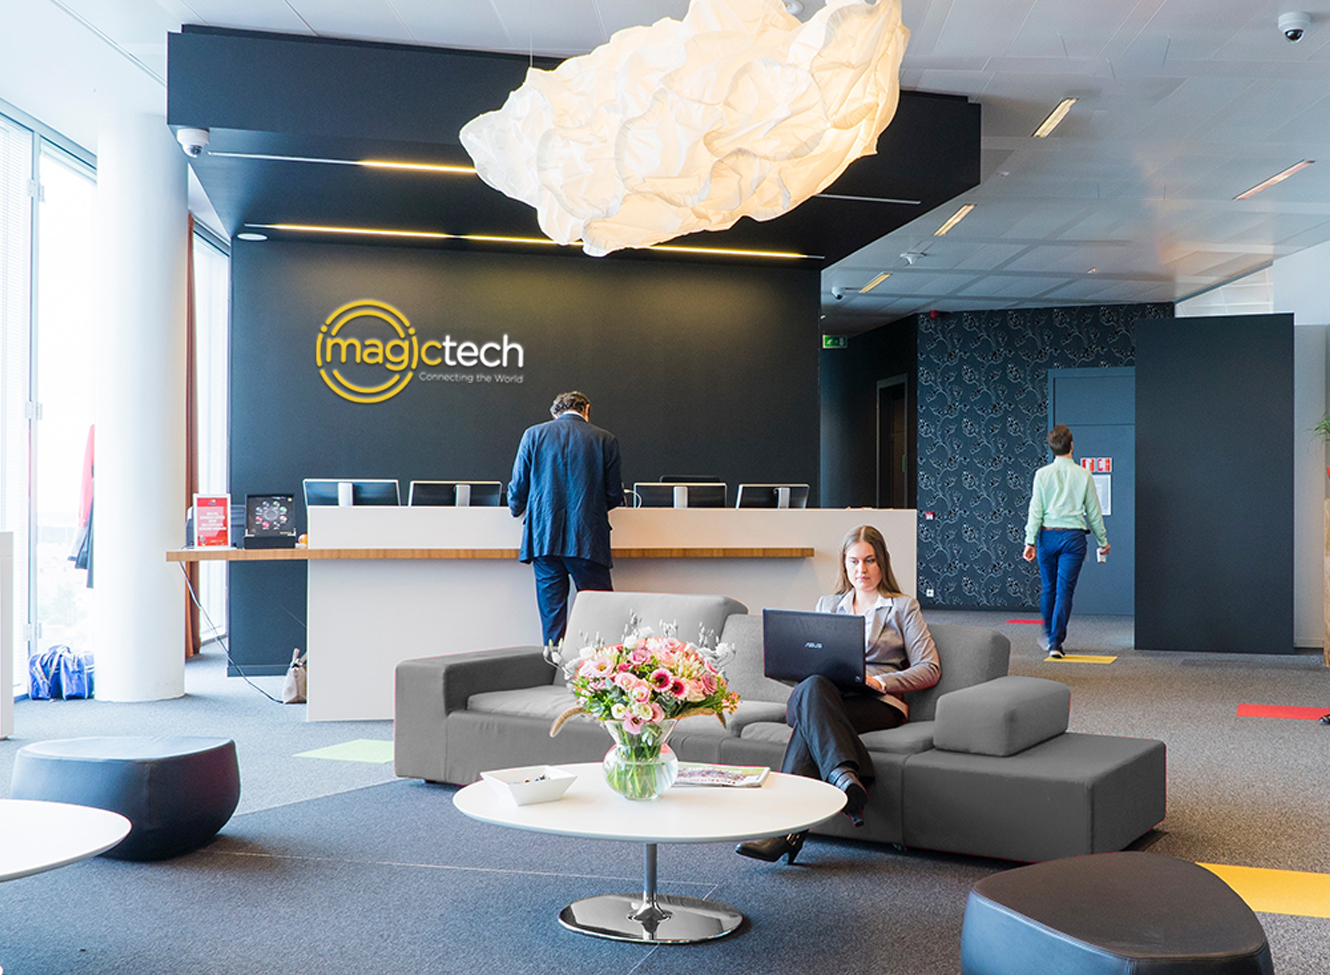 ImagicTech connecting the world